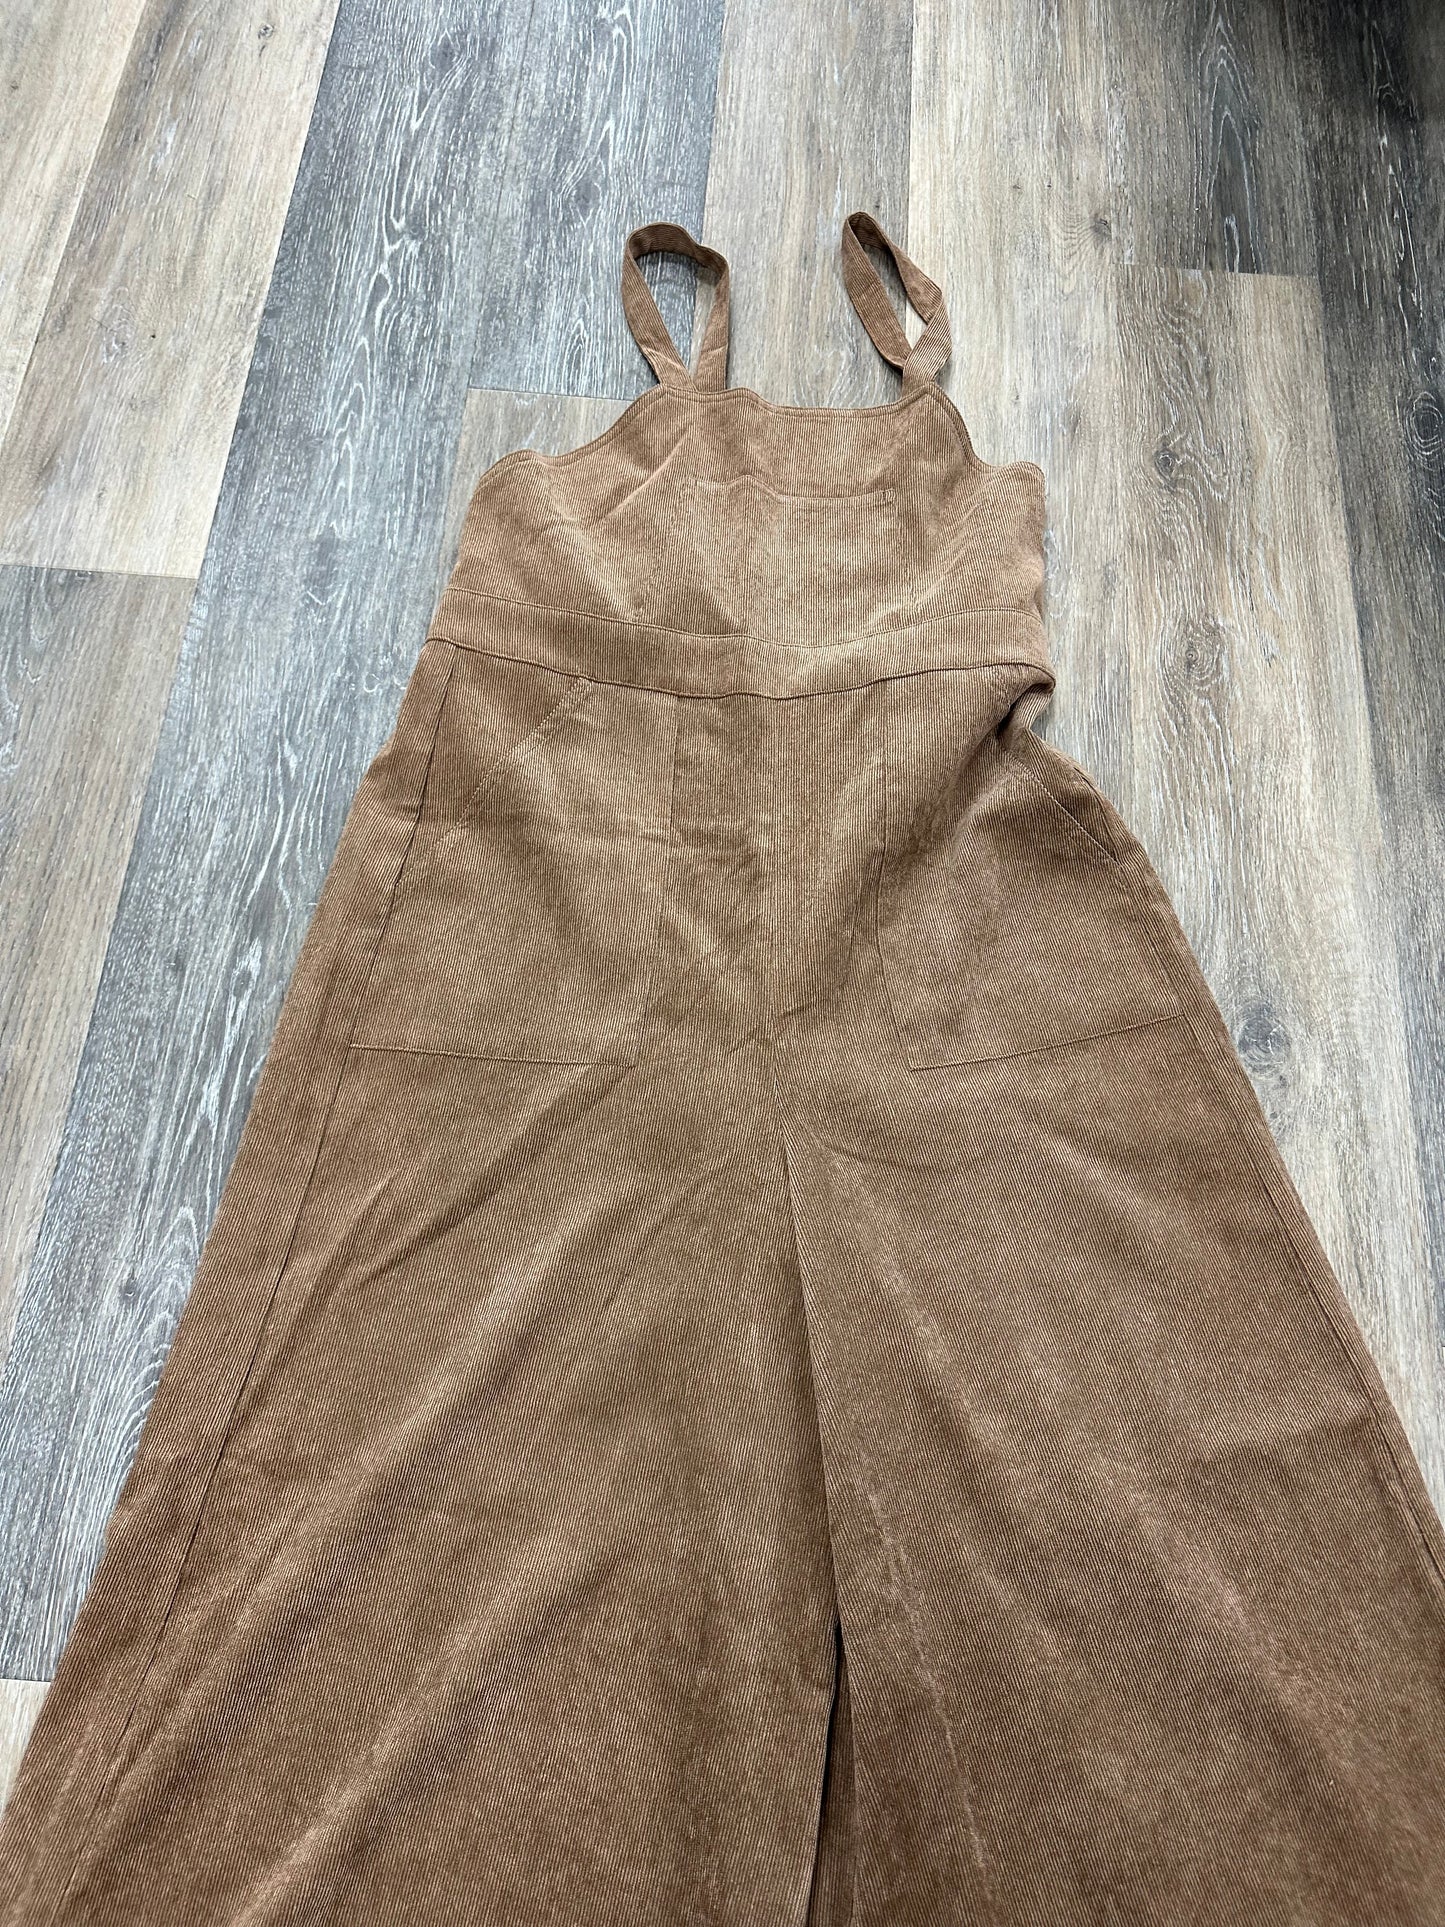 Overalls By Flying Monkey  Size: L